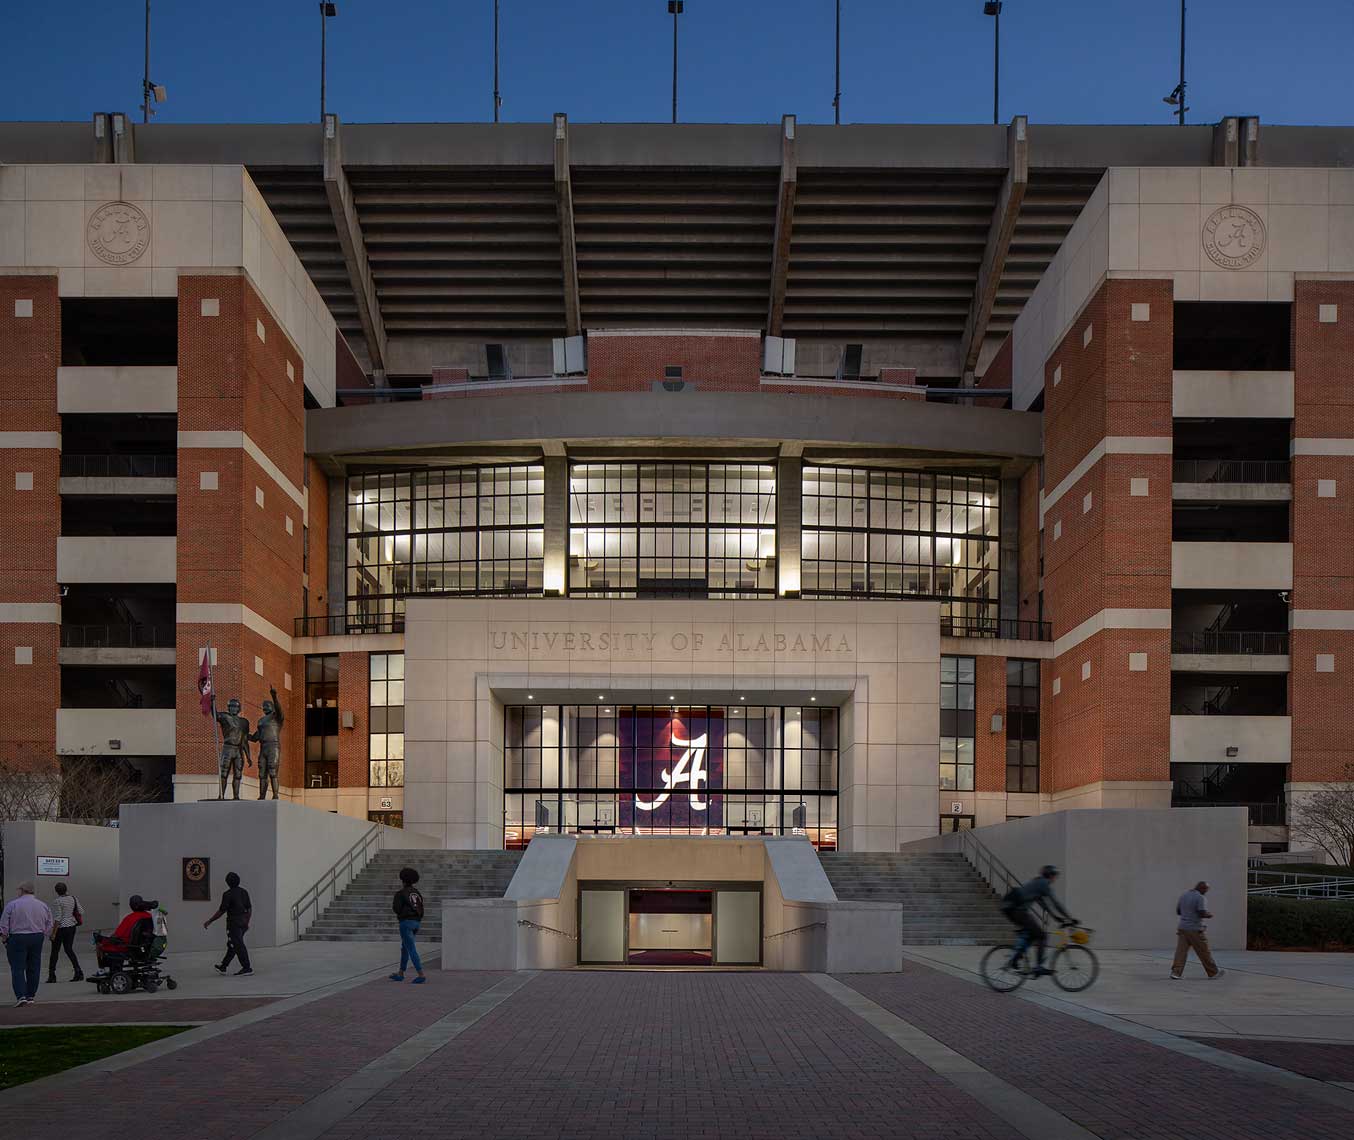 Fans walk by the player entrance to the University of Alabama Bryant-Denny Stadium at twilight